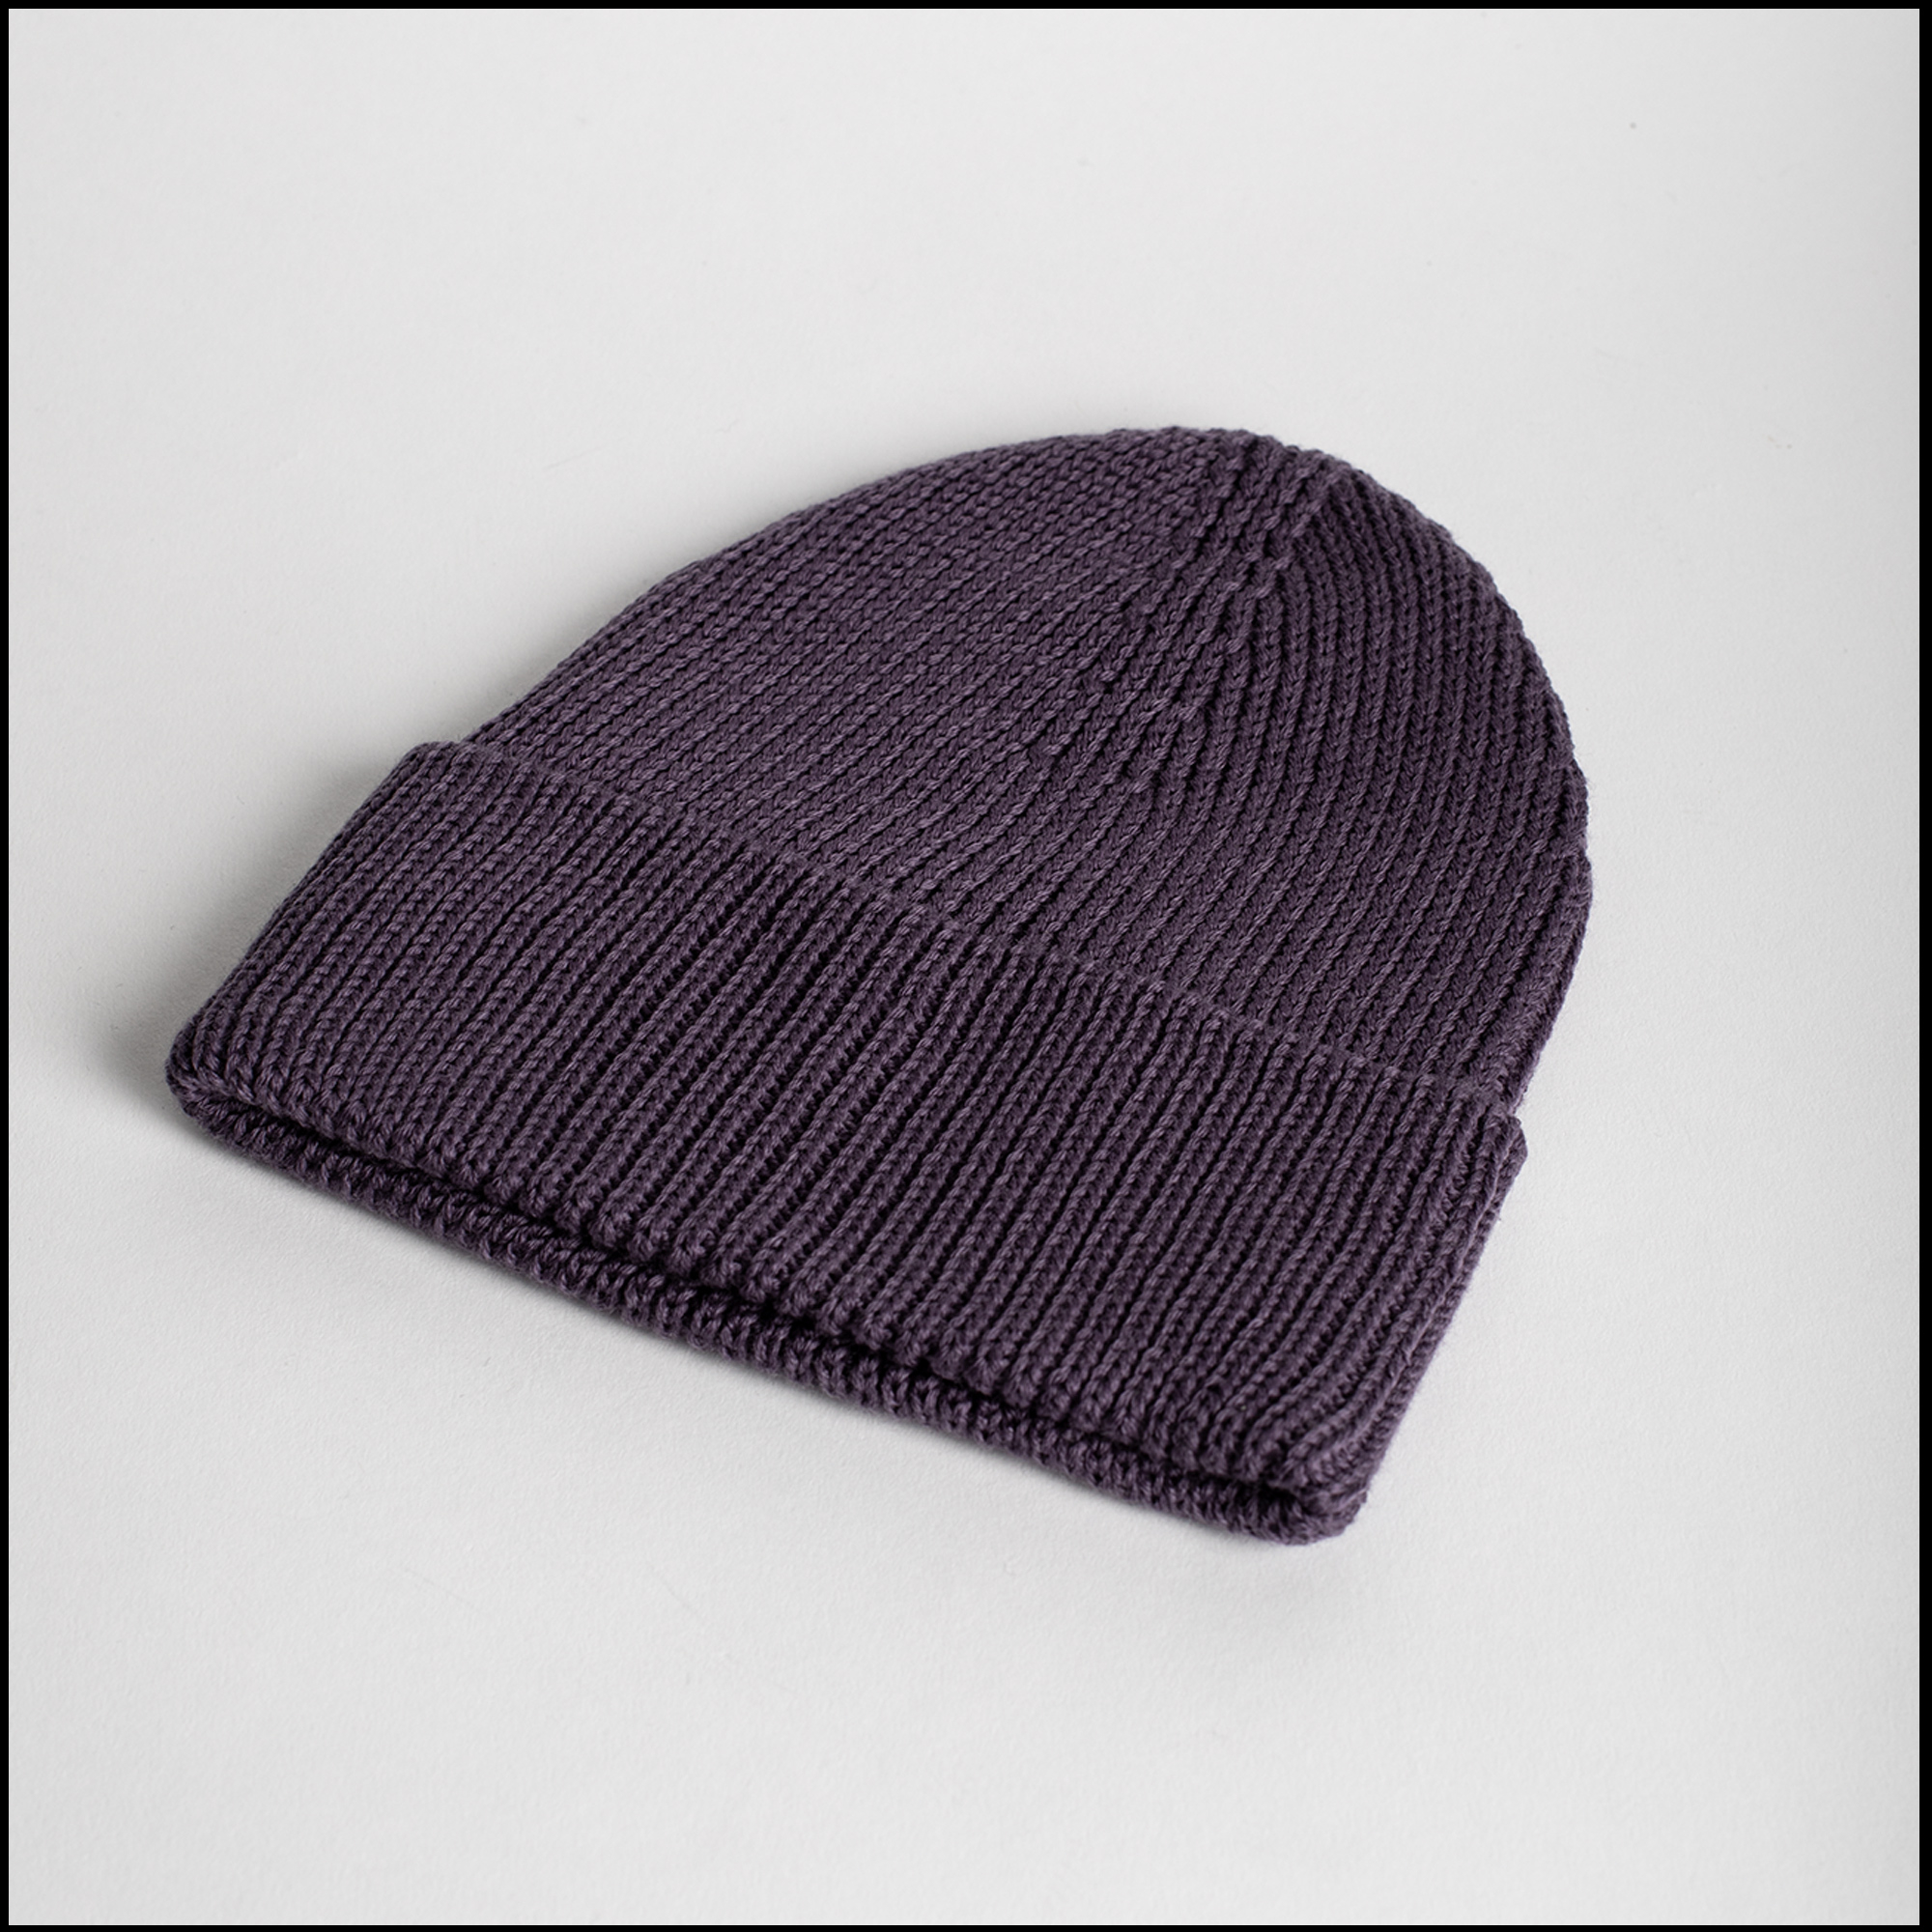 VICKO beanie in Purple color by Arpenteur